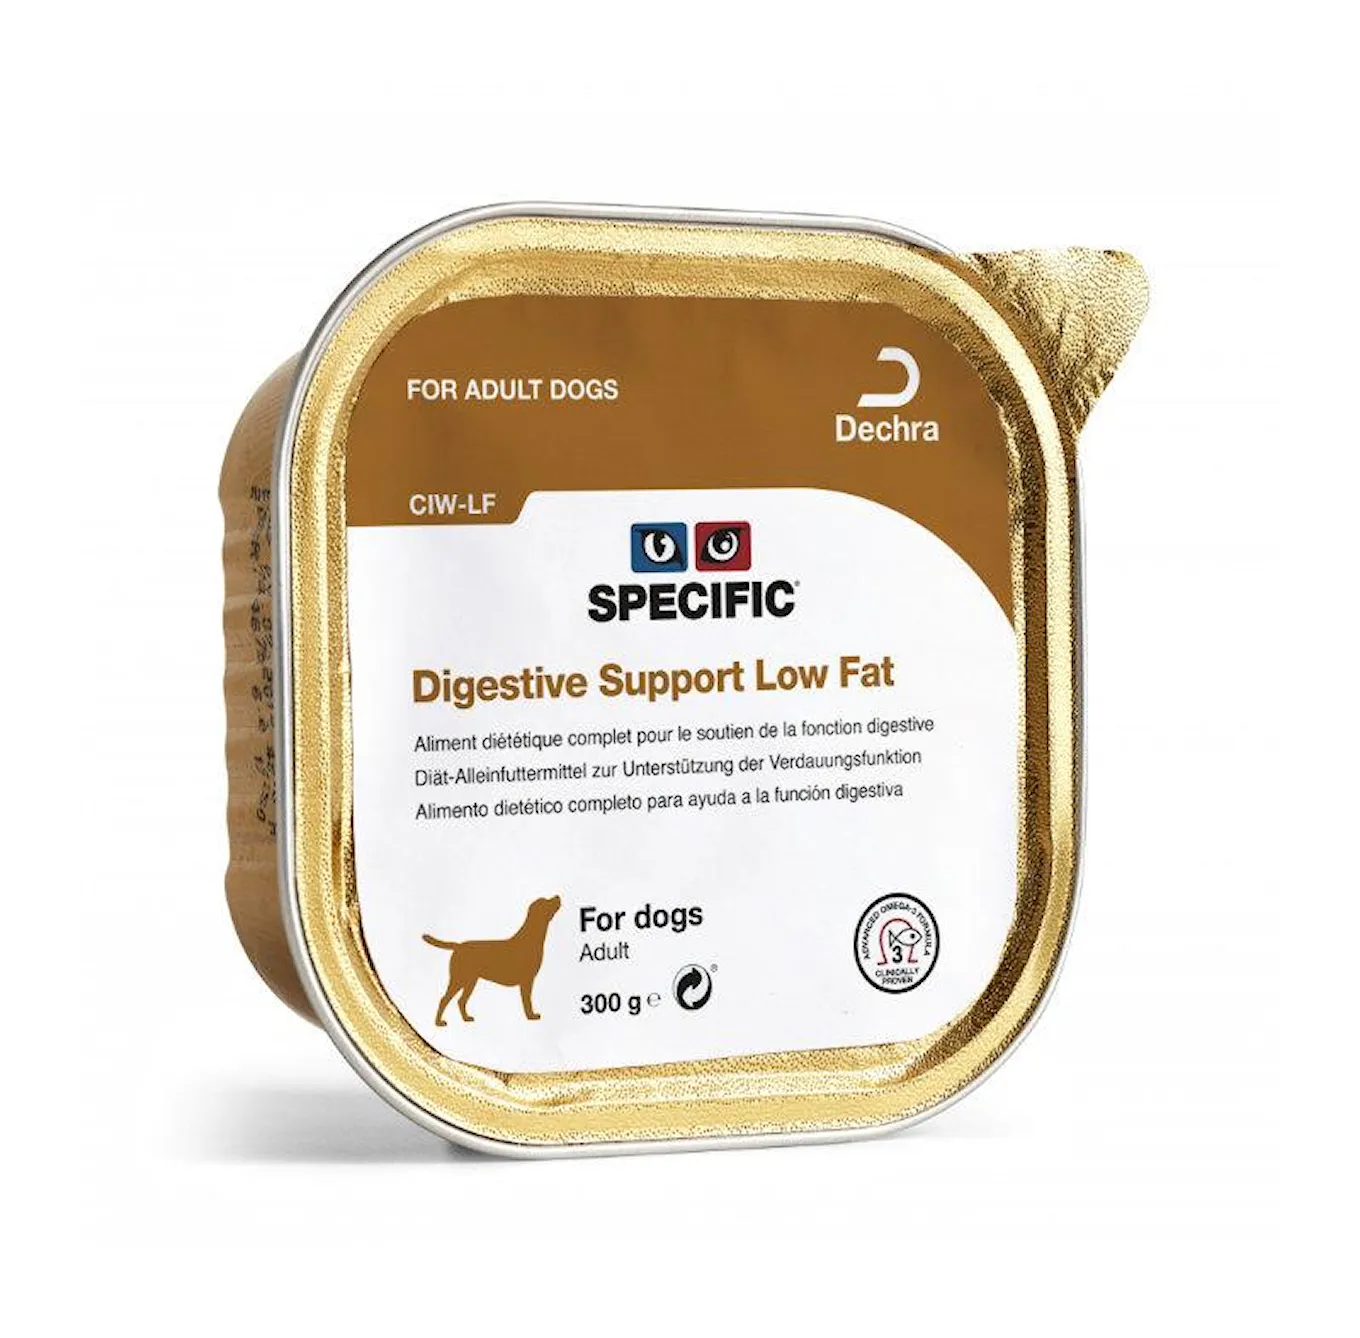 specific_diets_dog_food_cid_lf_digestive_support_l